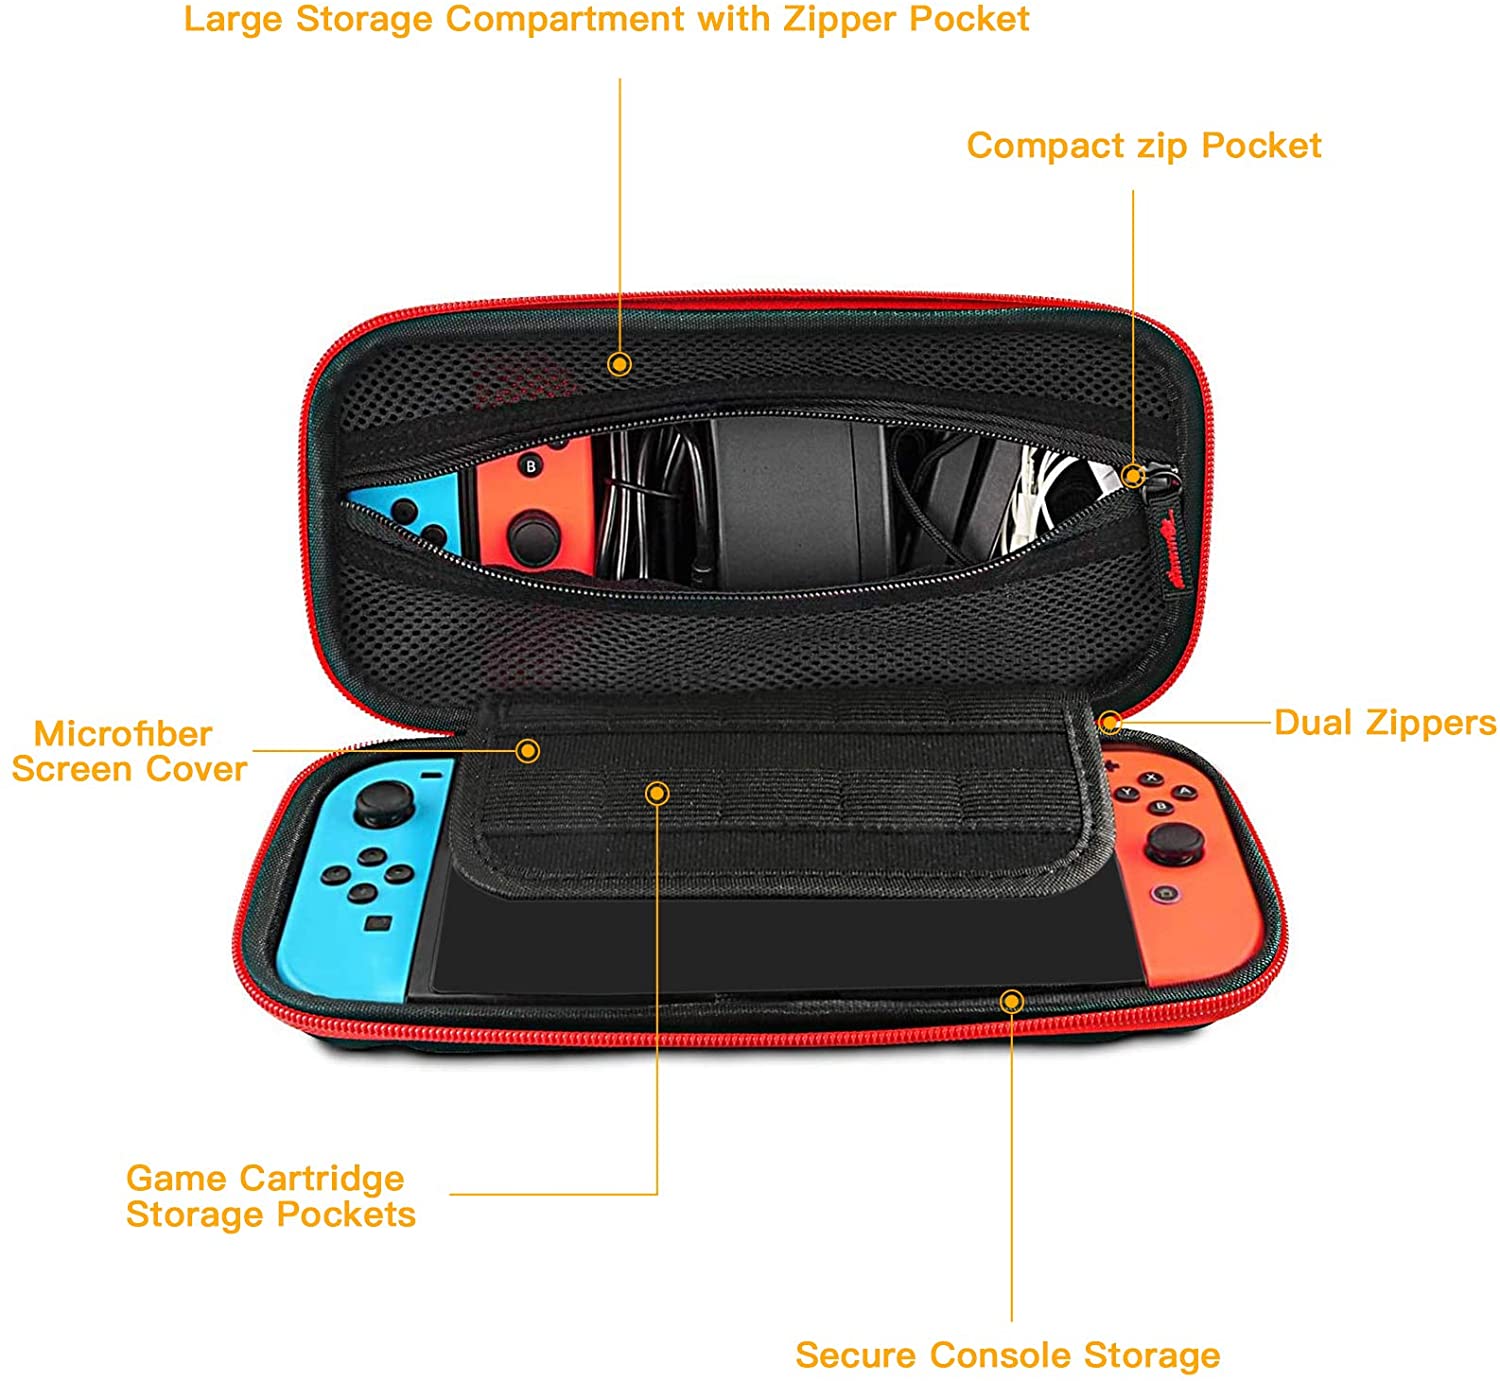 The carrying case has storage for game cards and the console, dual zippers, and a design with large capacity.